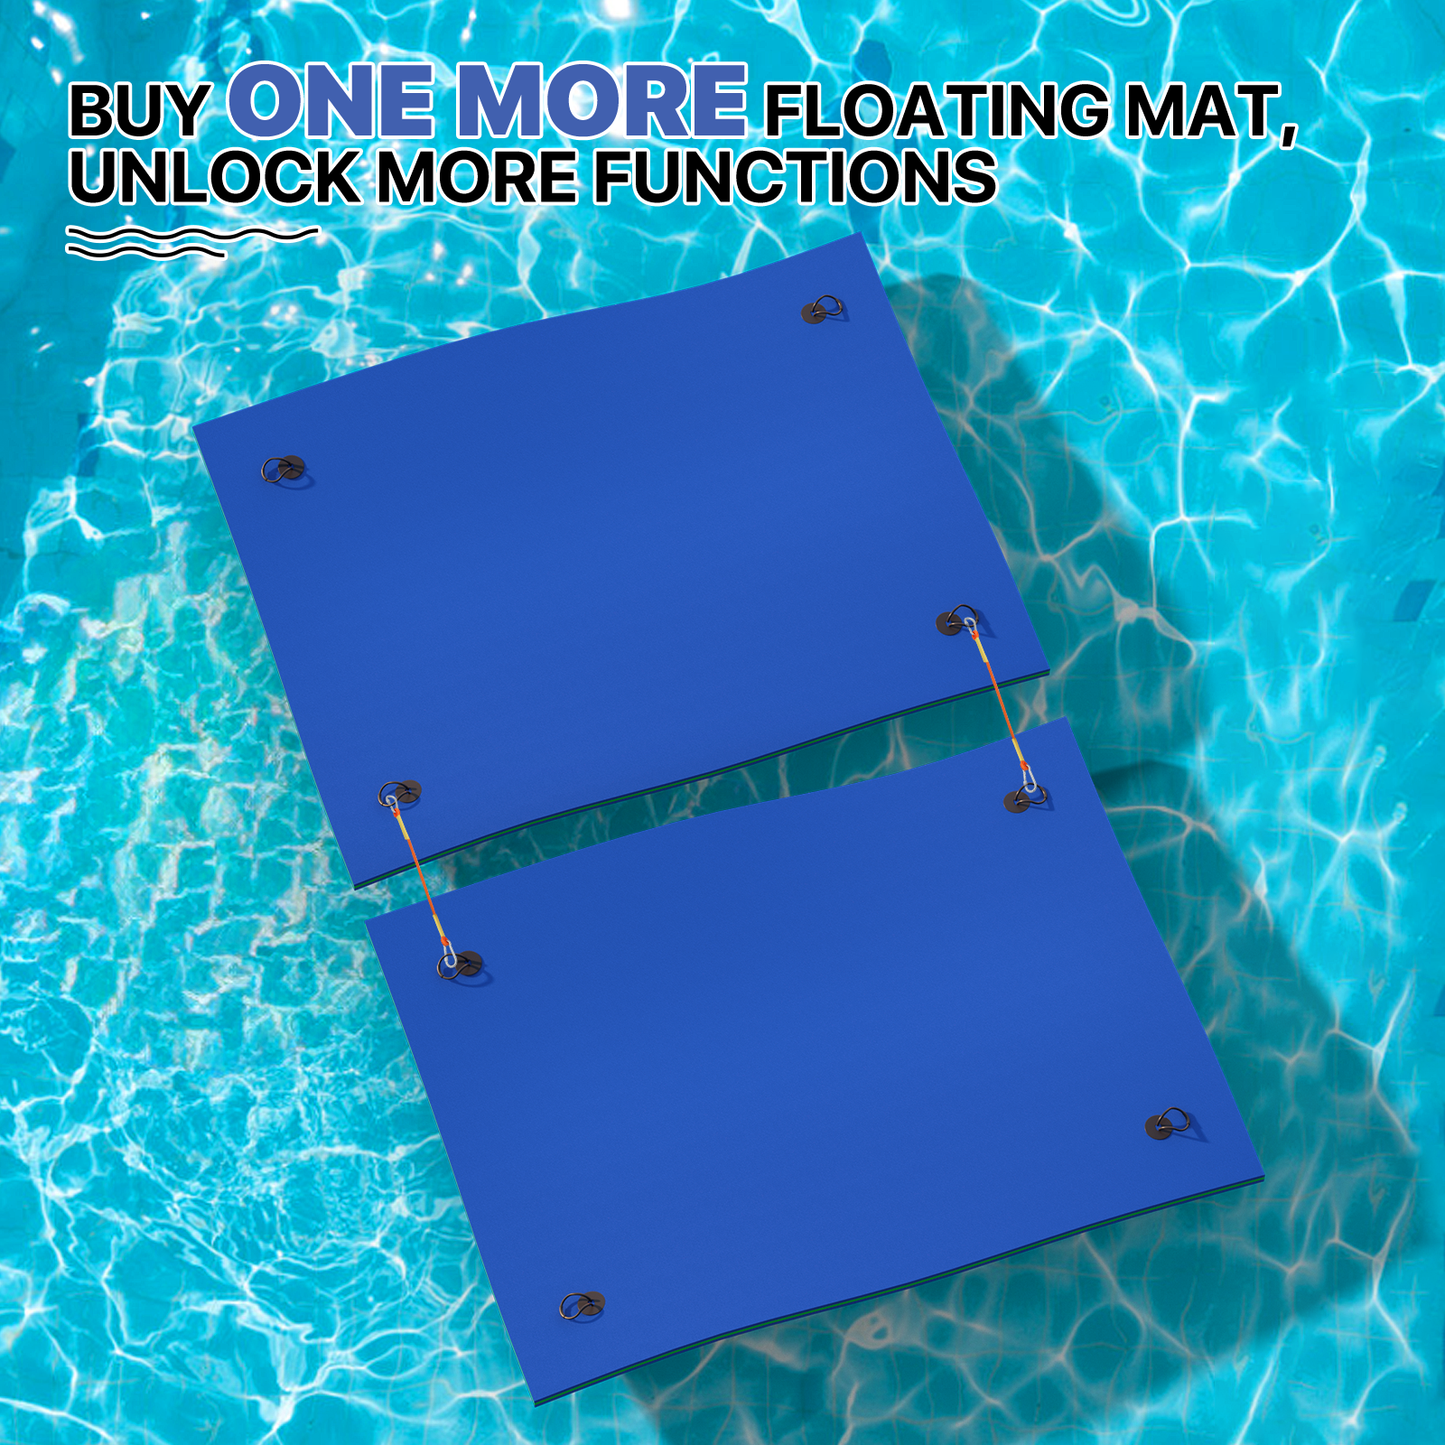 8 * 6 ft Water Floating Mat